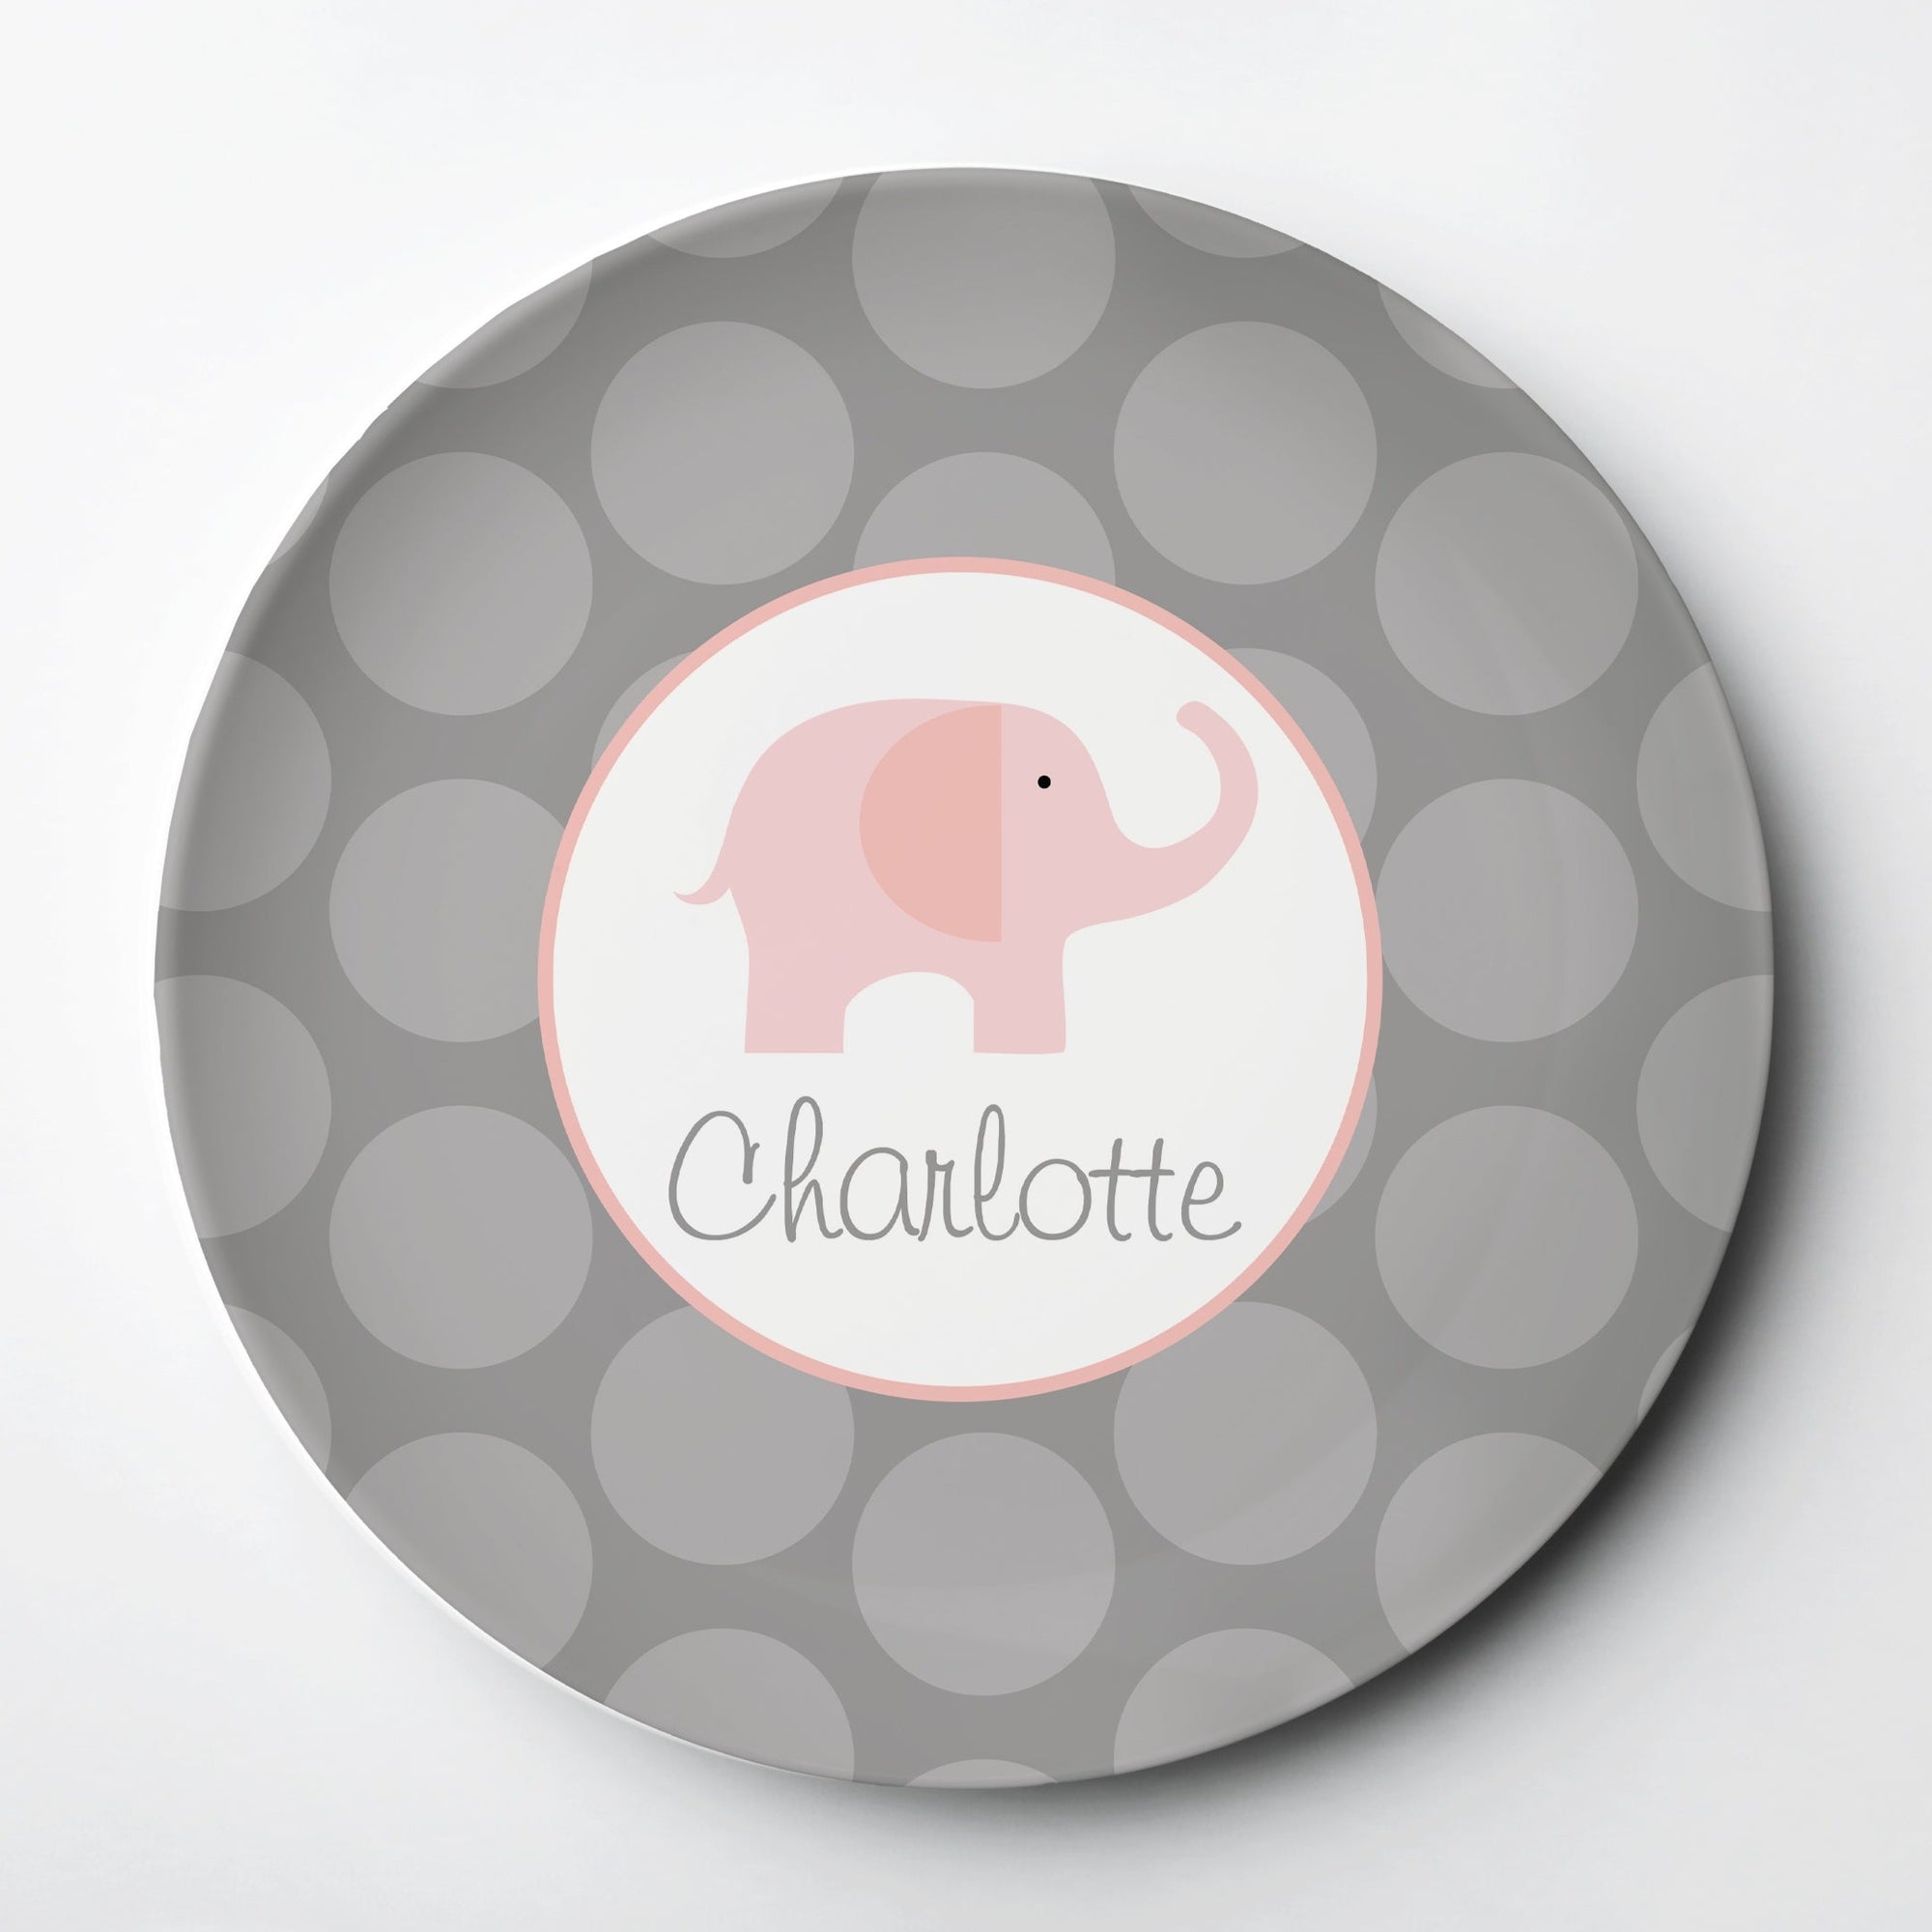 Personalized elephant plate, ThermoSāf® kids reusable plate, microwave, dishwasher and oven safe.  Made in the USA, Pipsy.com